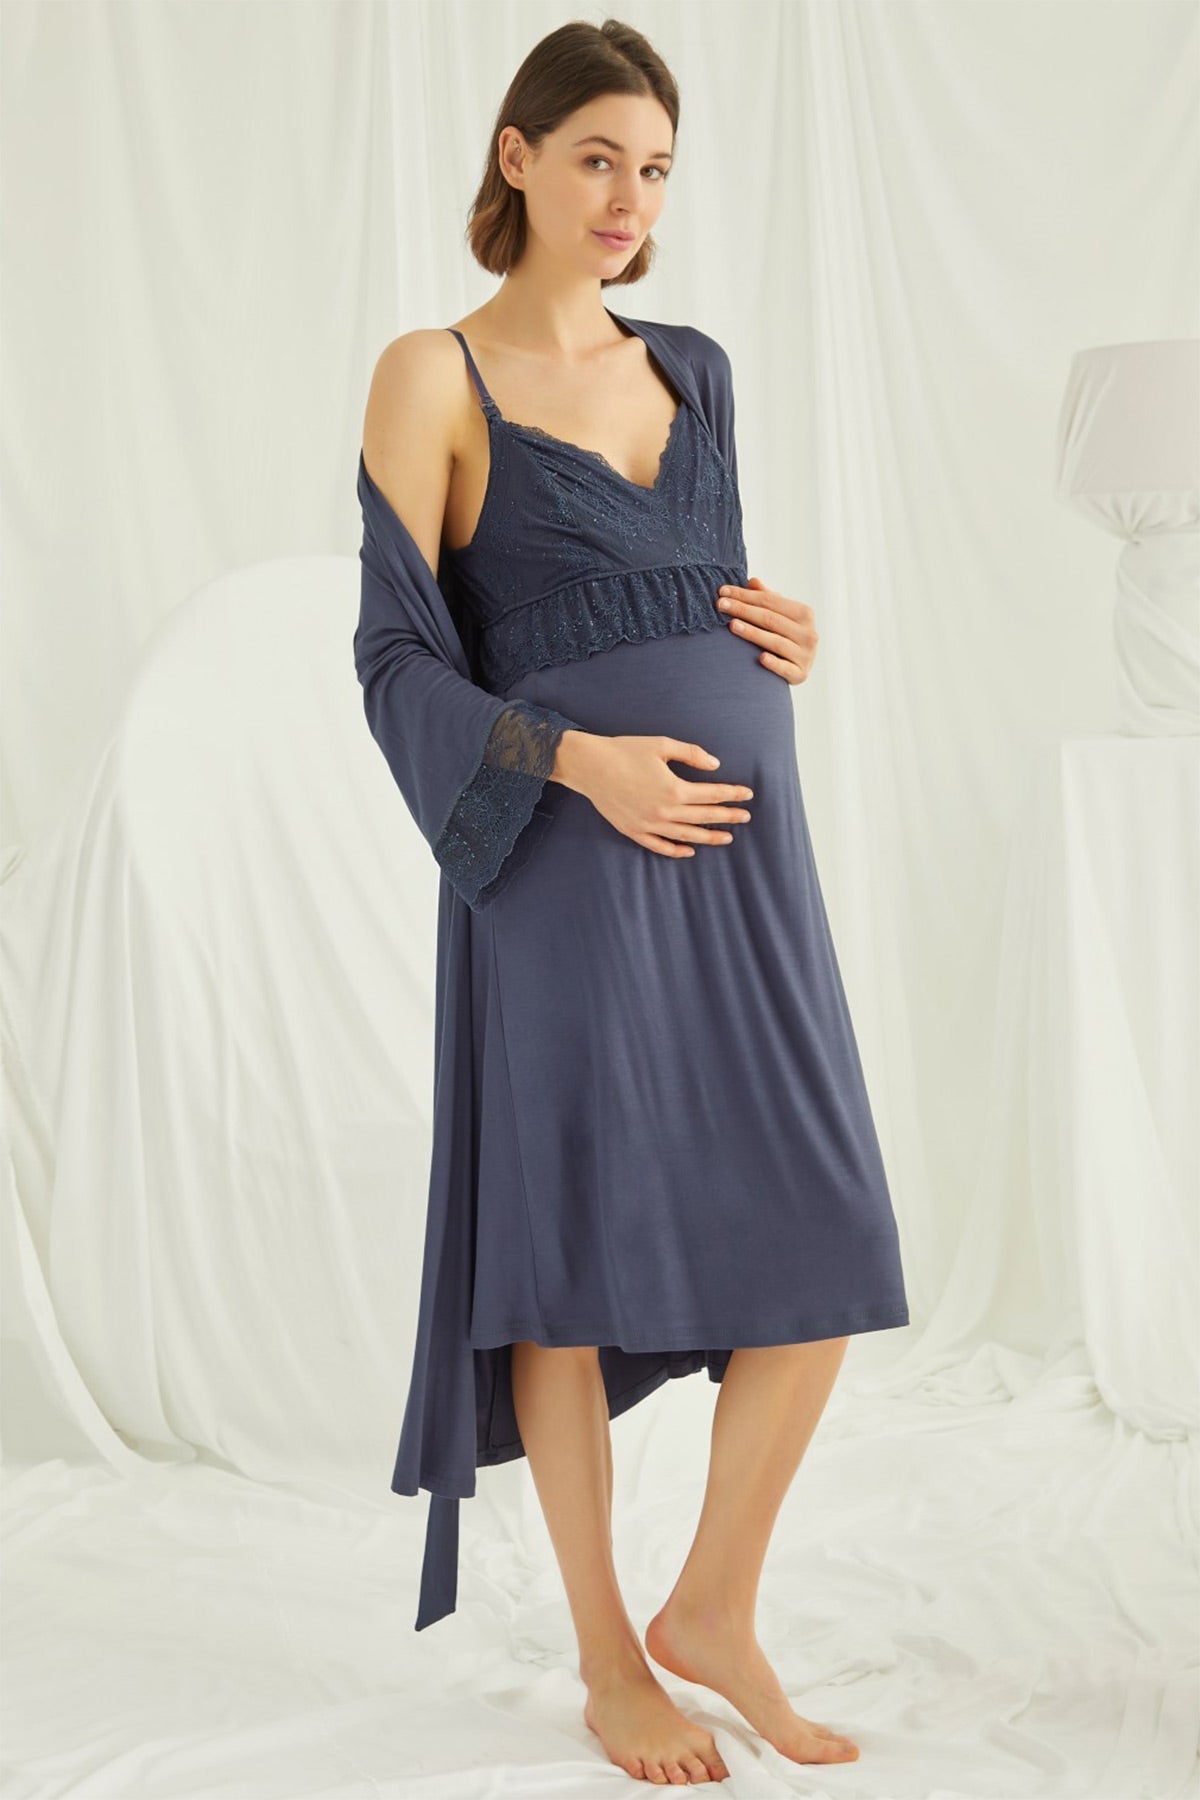 Lace Strappy Maternity & Nursing Nightgown With Robe Set Navy Blue - 18428